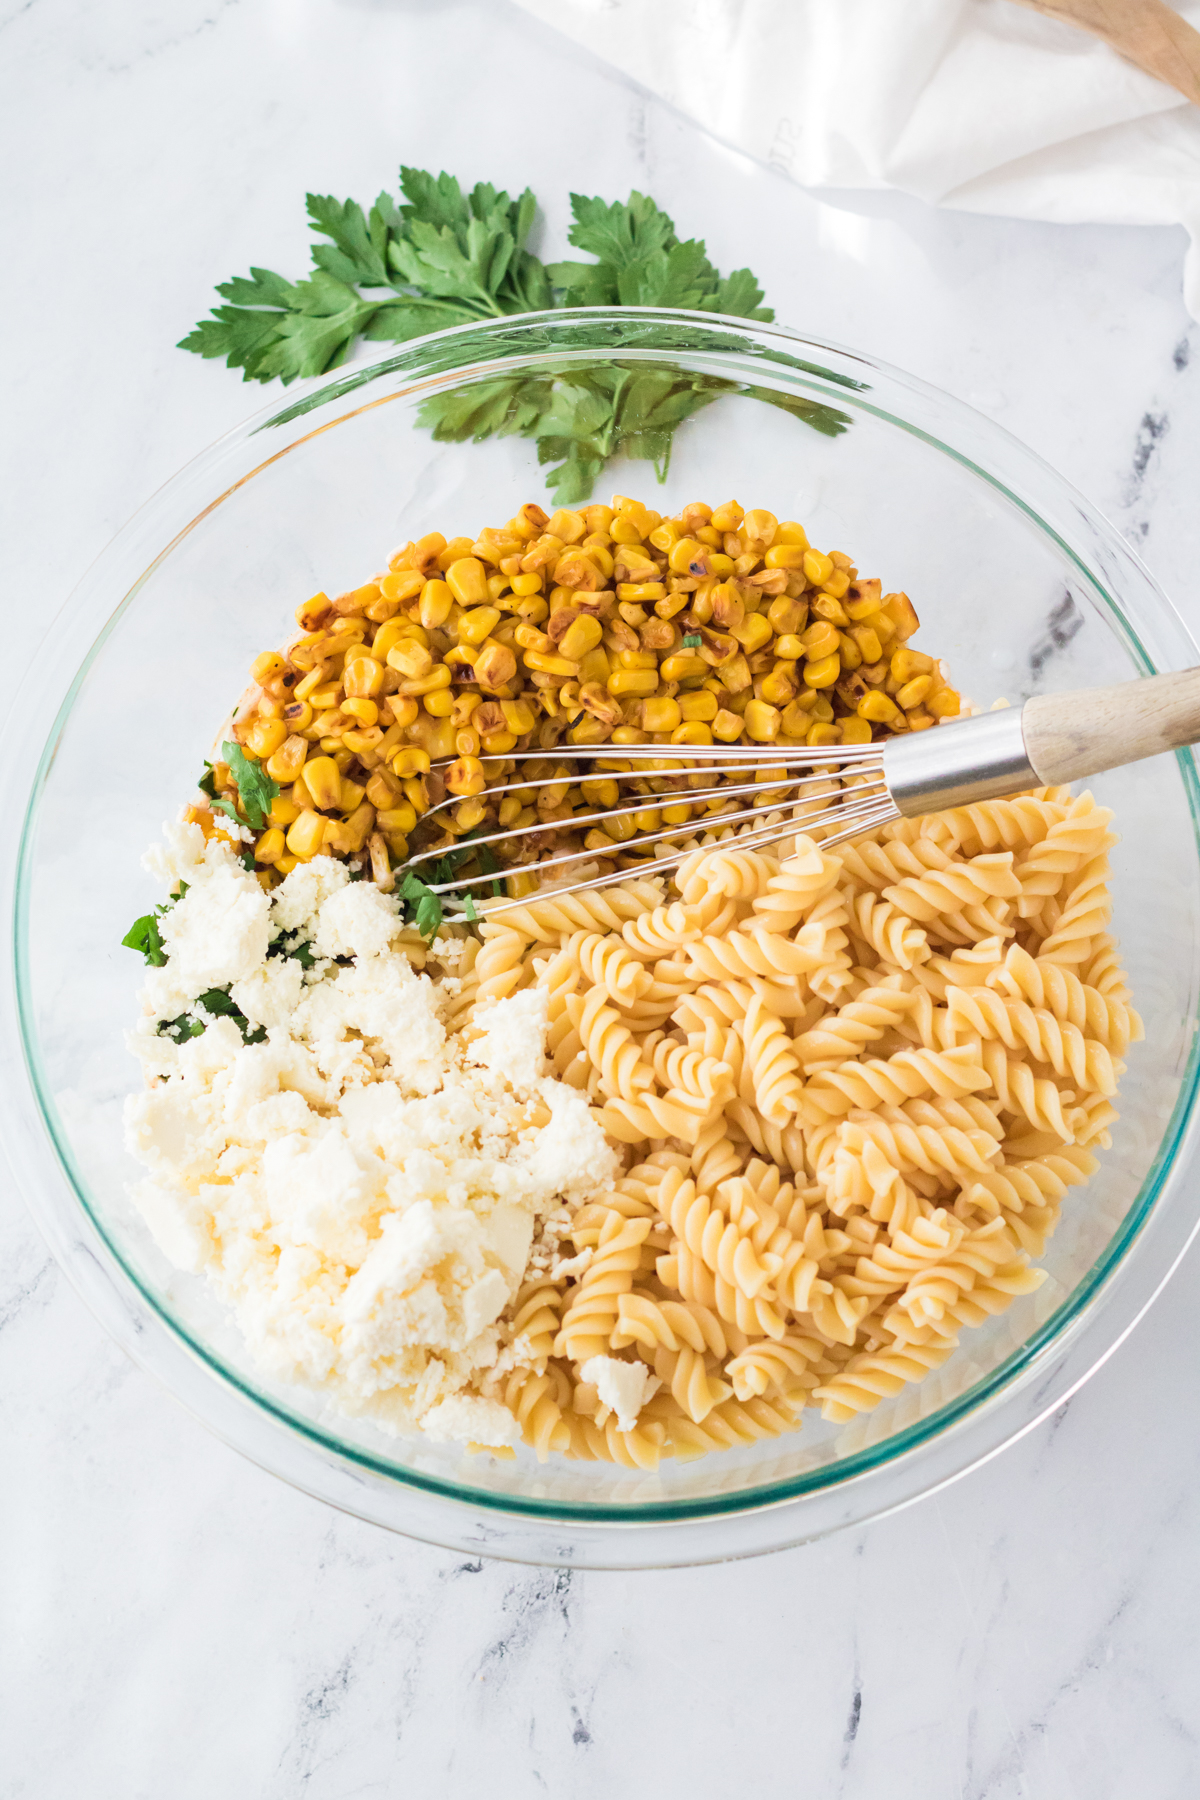 Mexican Street Corn Pasta Salad in Bamboo Cups - Sunshine Parties